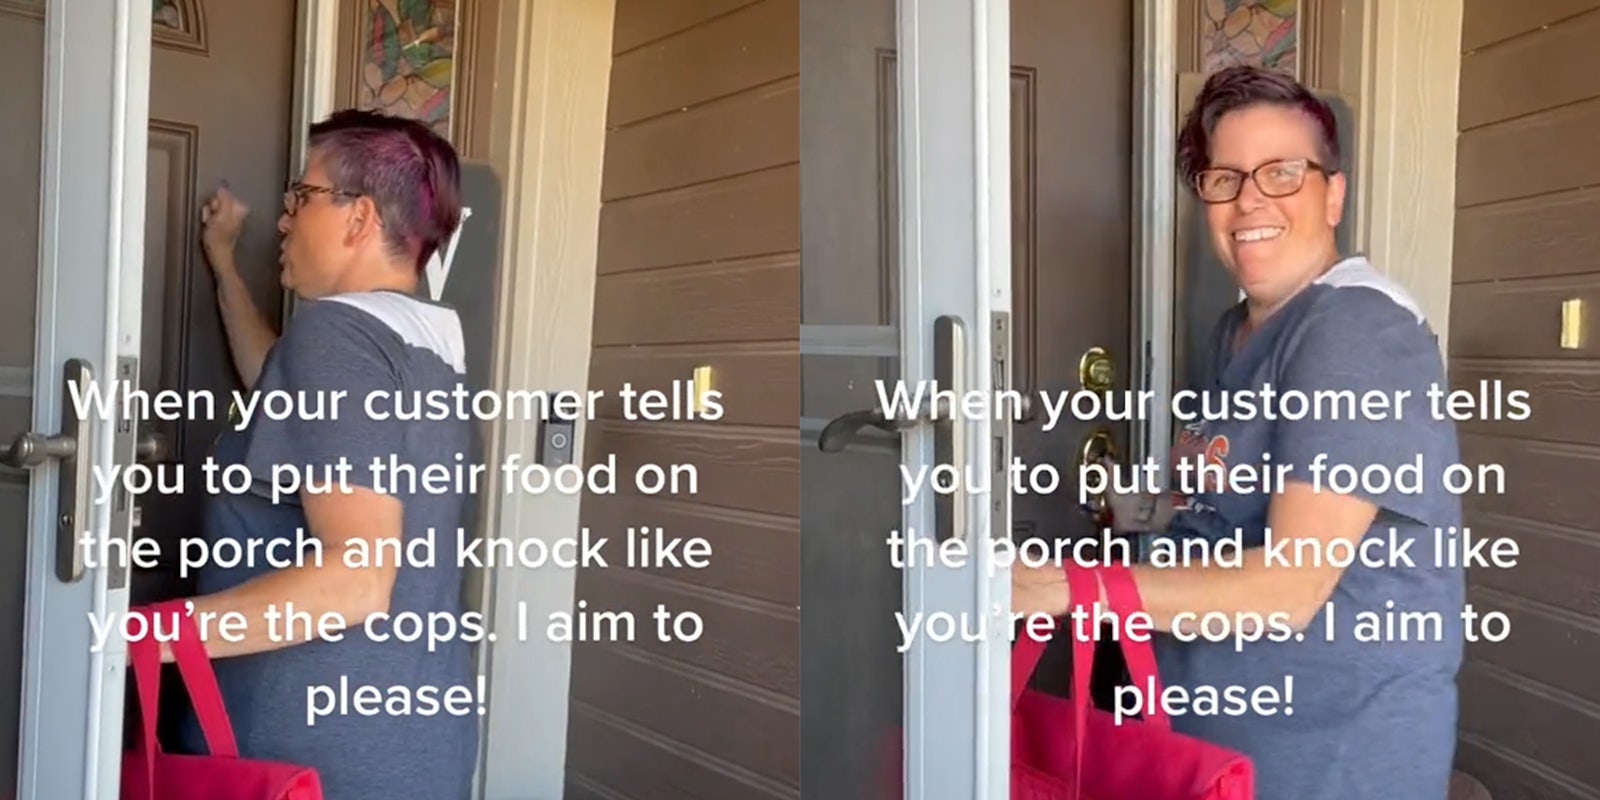 Woman delivering food, knocking on door with caption 'When your customer tells you to put their food on the porch and knock like you're the cops. I aim to please!'